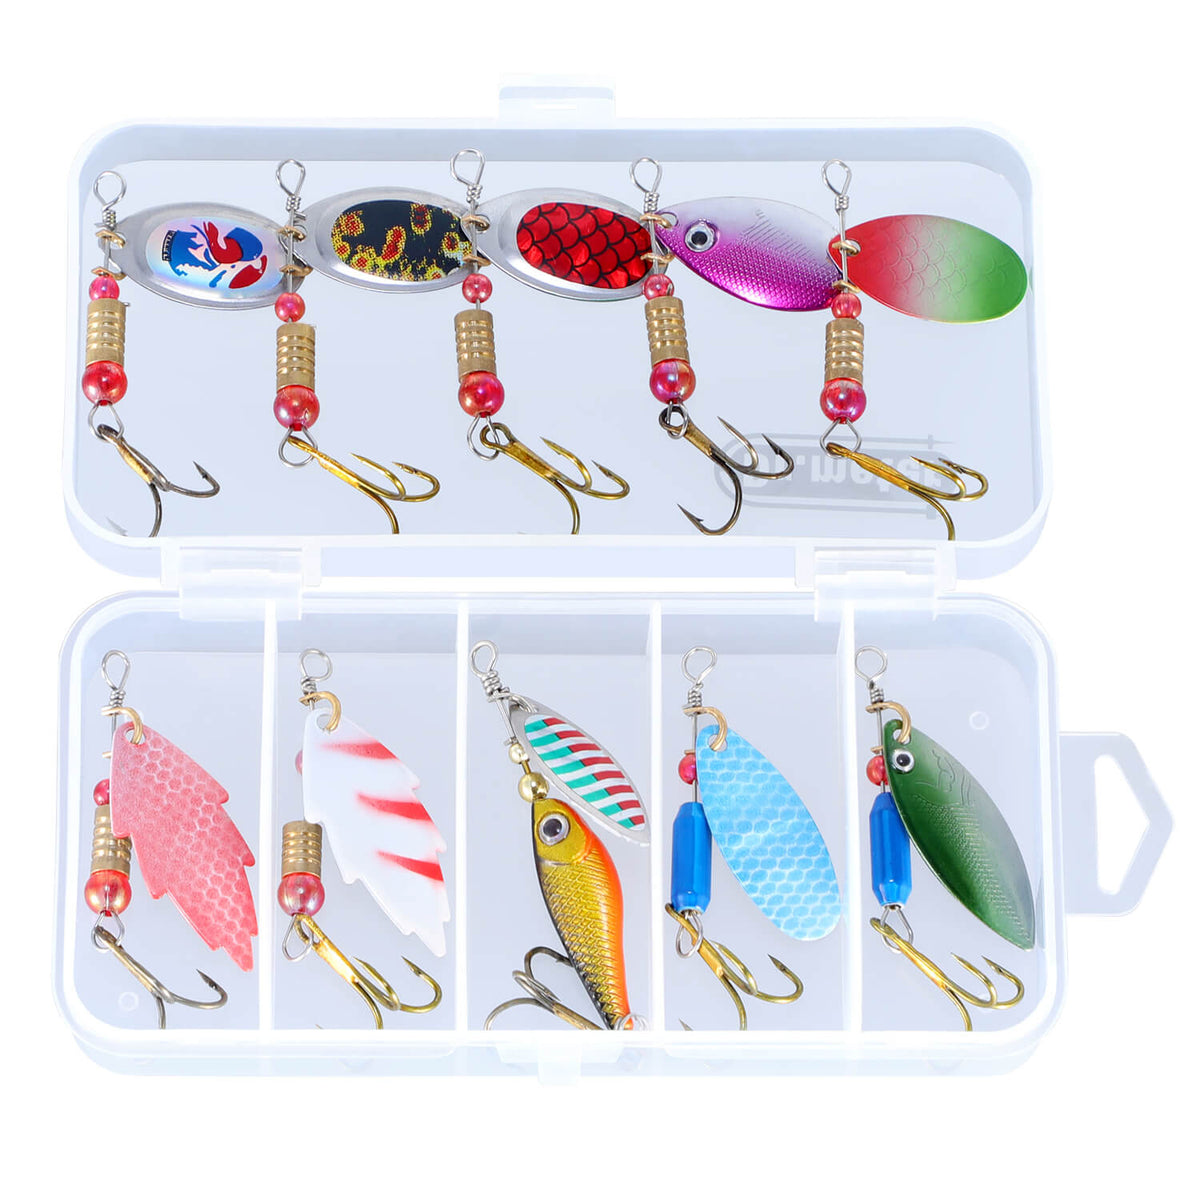 Multiple Lure Making Kits - Make your own fishing spinner - Dr.Fish – Dr. Fish Tackles, Lure Making Supplies 